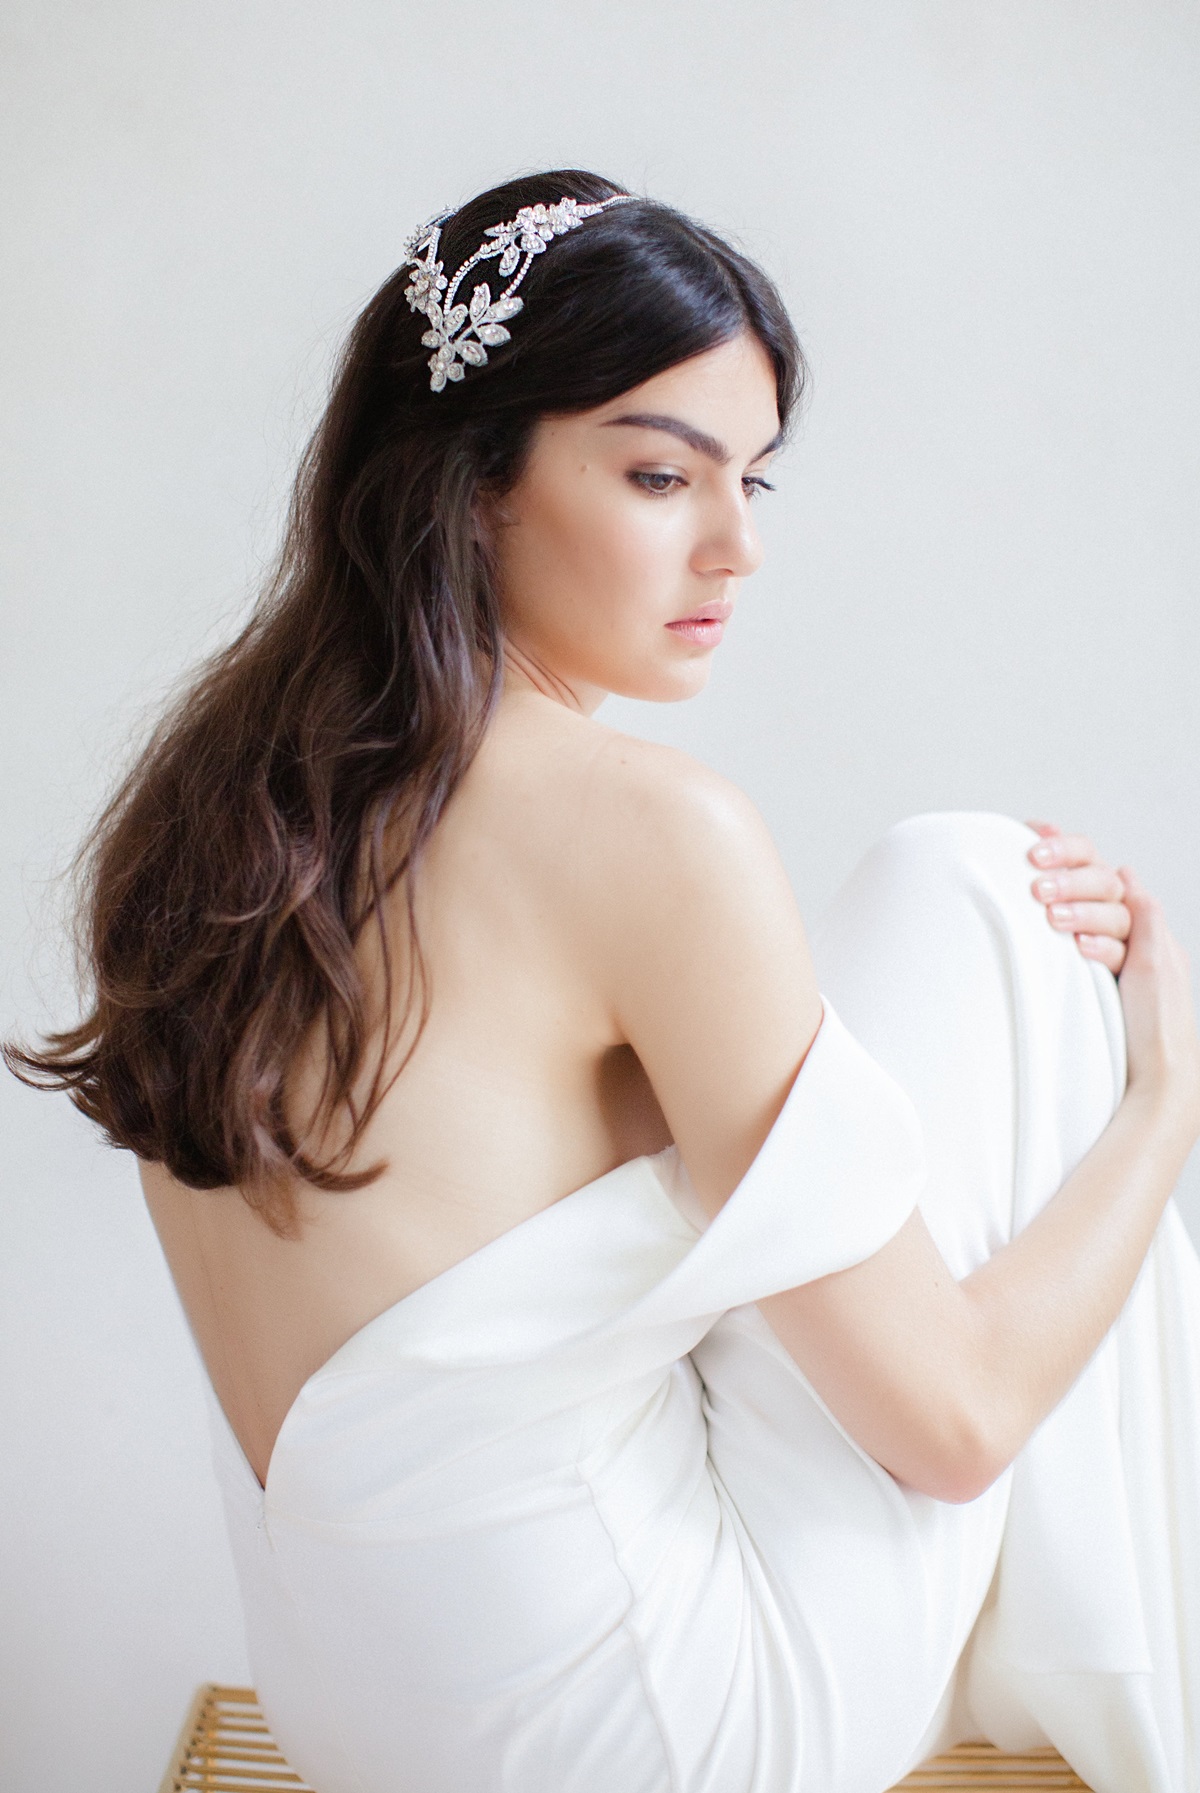 Jannie Baltzer 2017 collection of ethereal and magical bridal headpiece and accessories